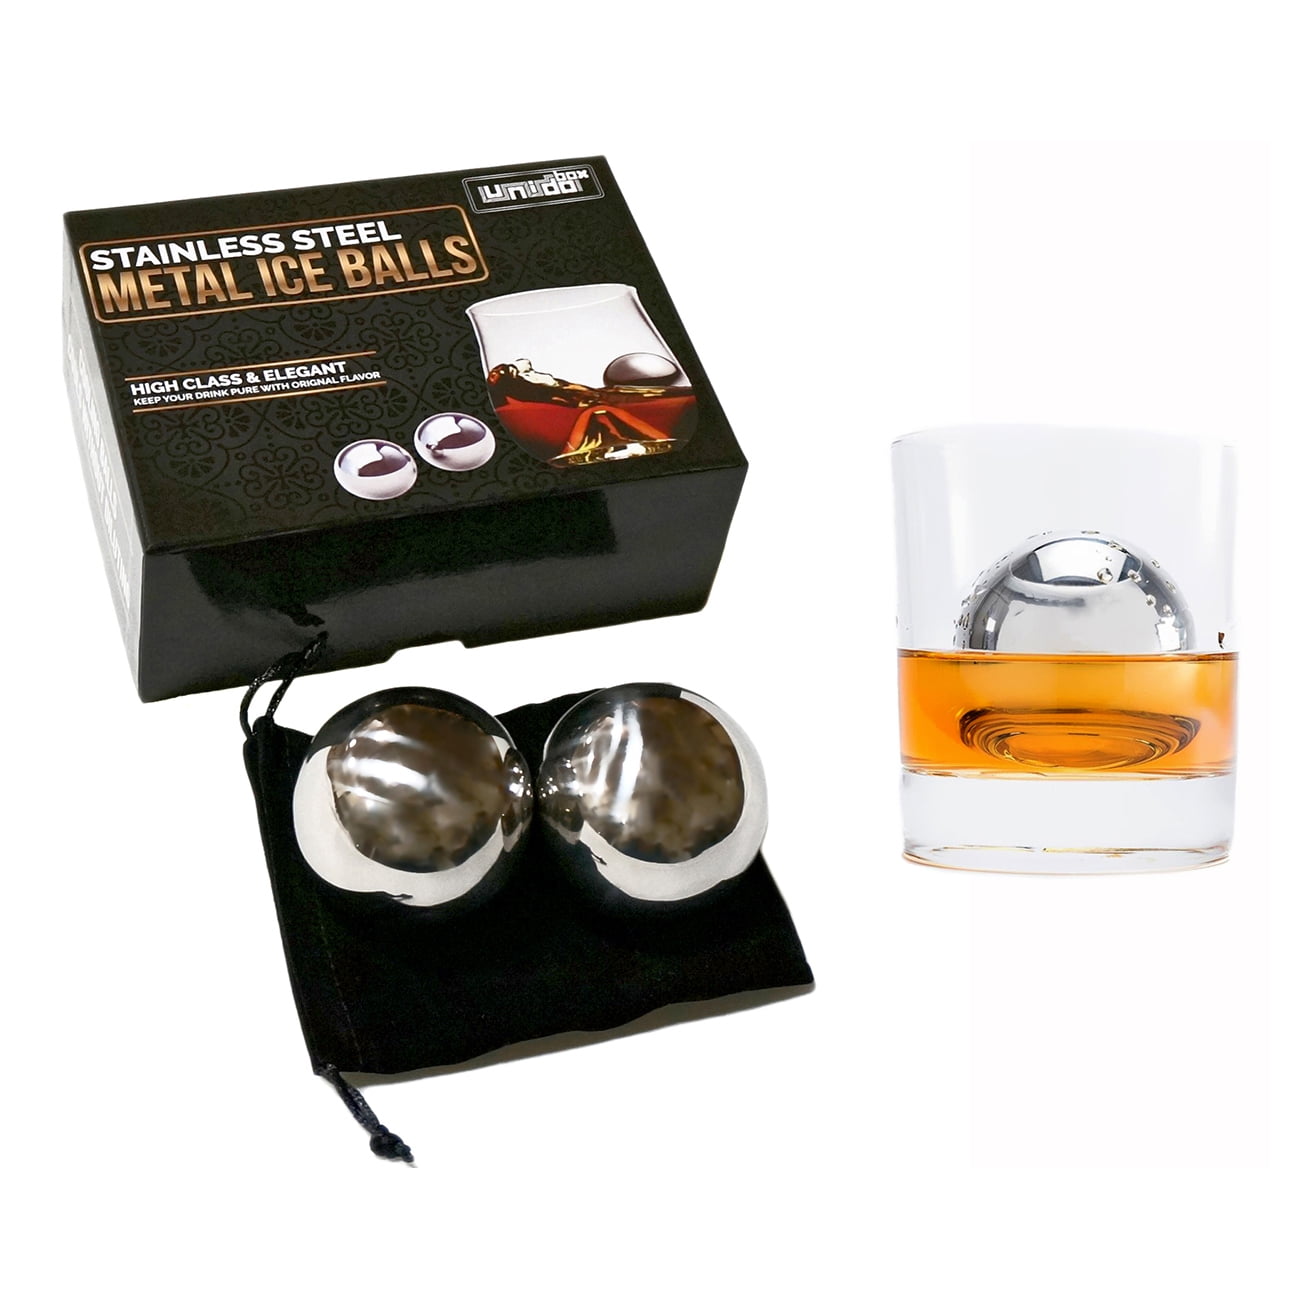 5 Pcs Golf Ball Whiskey Chillers with Box Portable Ice Stone Set Whiskey  Ice Hockey Clip Whiskey Ice Cubes Chilling Rocks for Birthday Housewarming